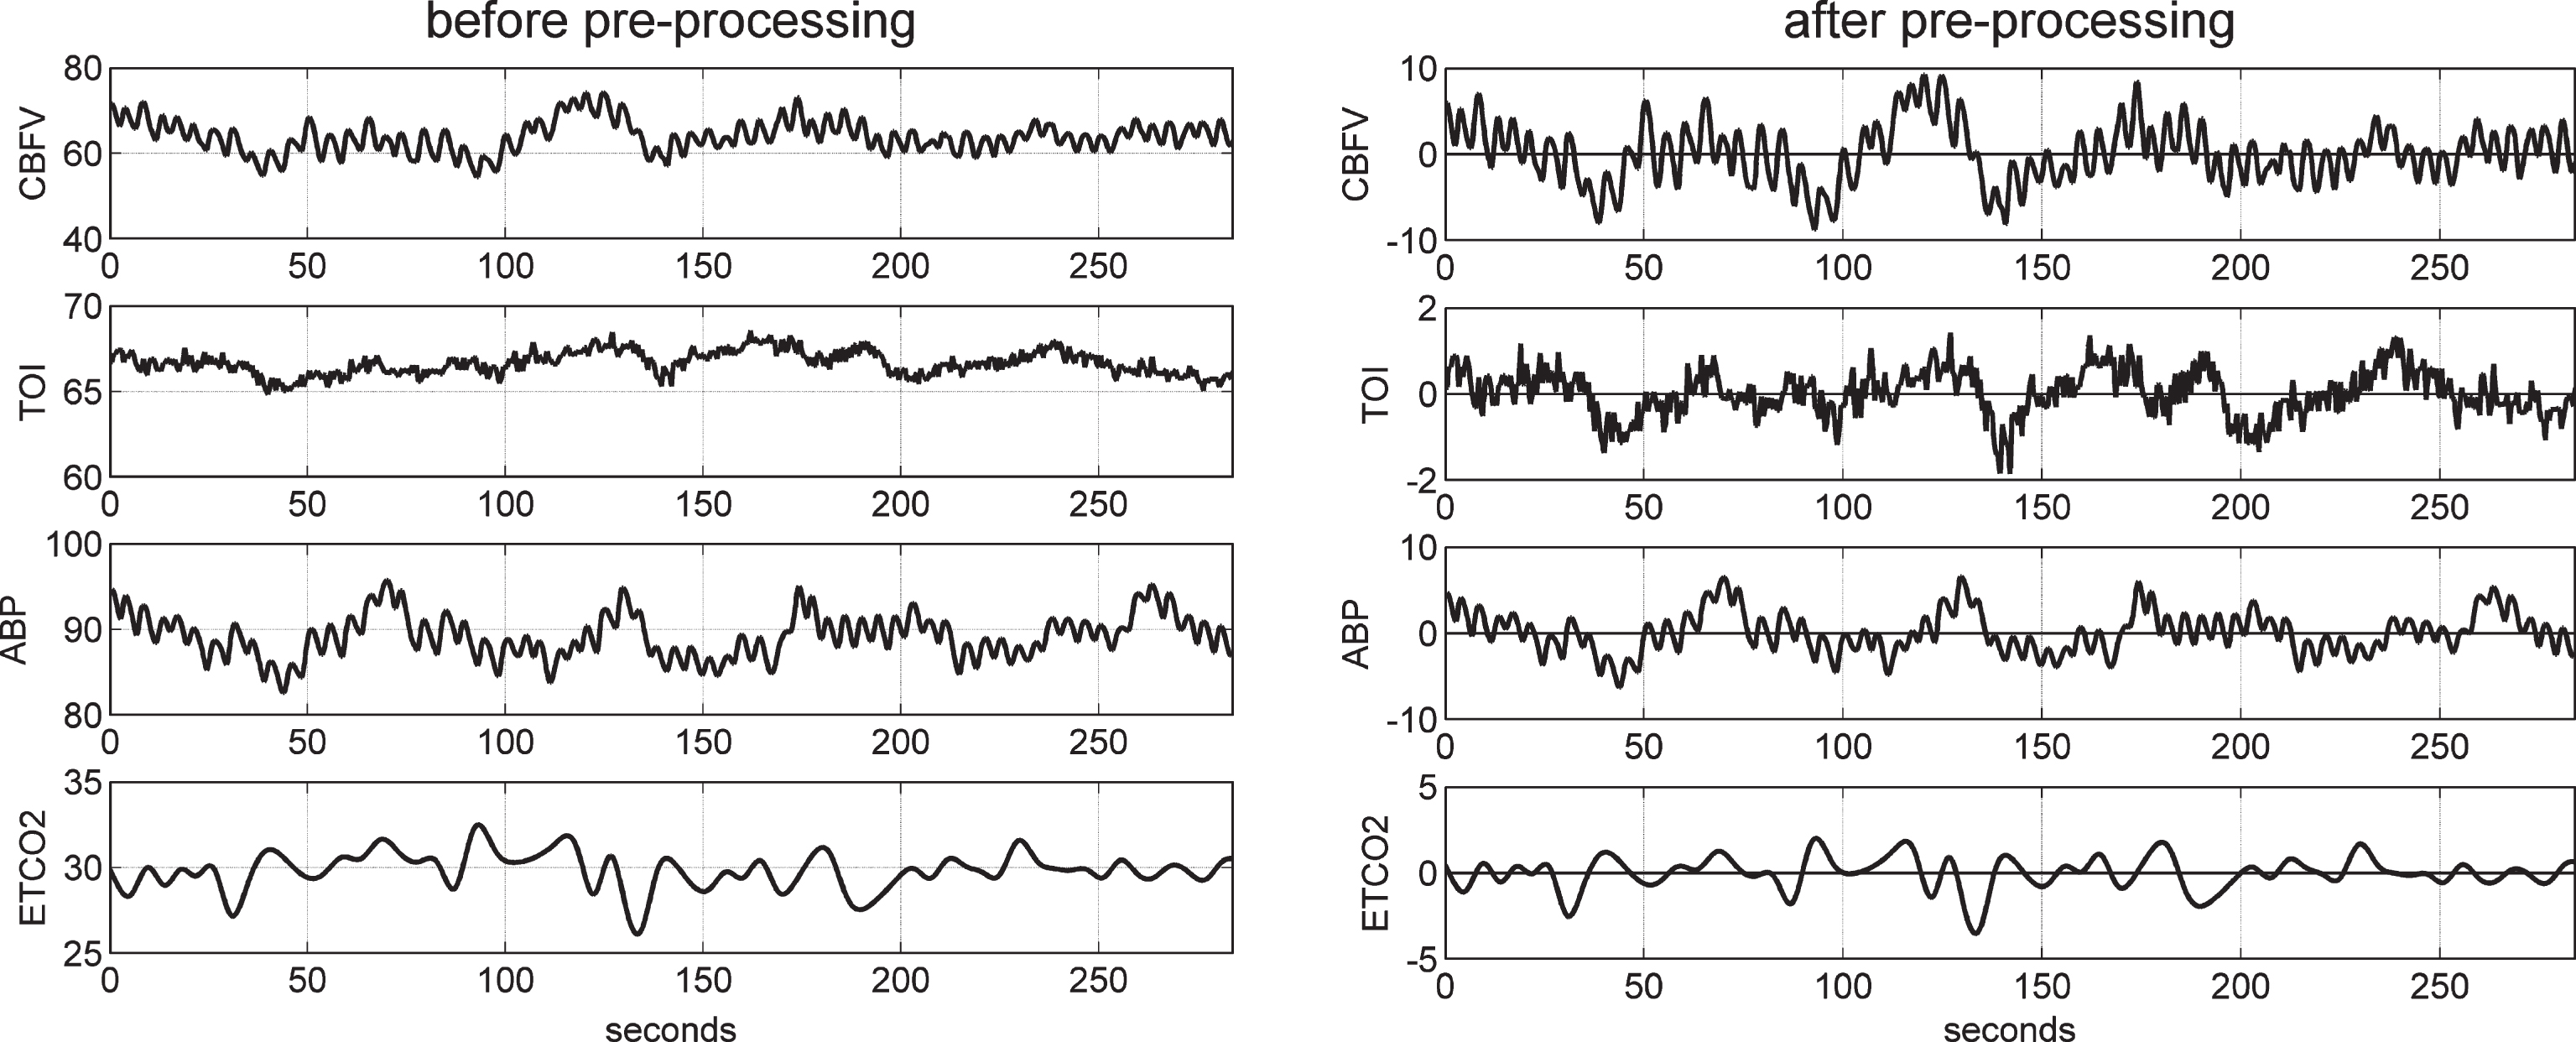 Illustrative time-series data over about 5 min for one control subject, representing beat-to-beat spontaneous variations of CBFV (top panel), TOI (2nd panel), ABP (3rd panel), and ETCO2 (bottom panel) before (left column) and after (right column) pre-processing. The units are: cm/s for CBFV, % for TOI, and mmHg for ABP and ETCO2.